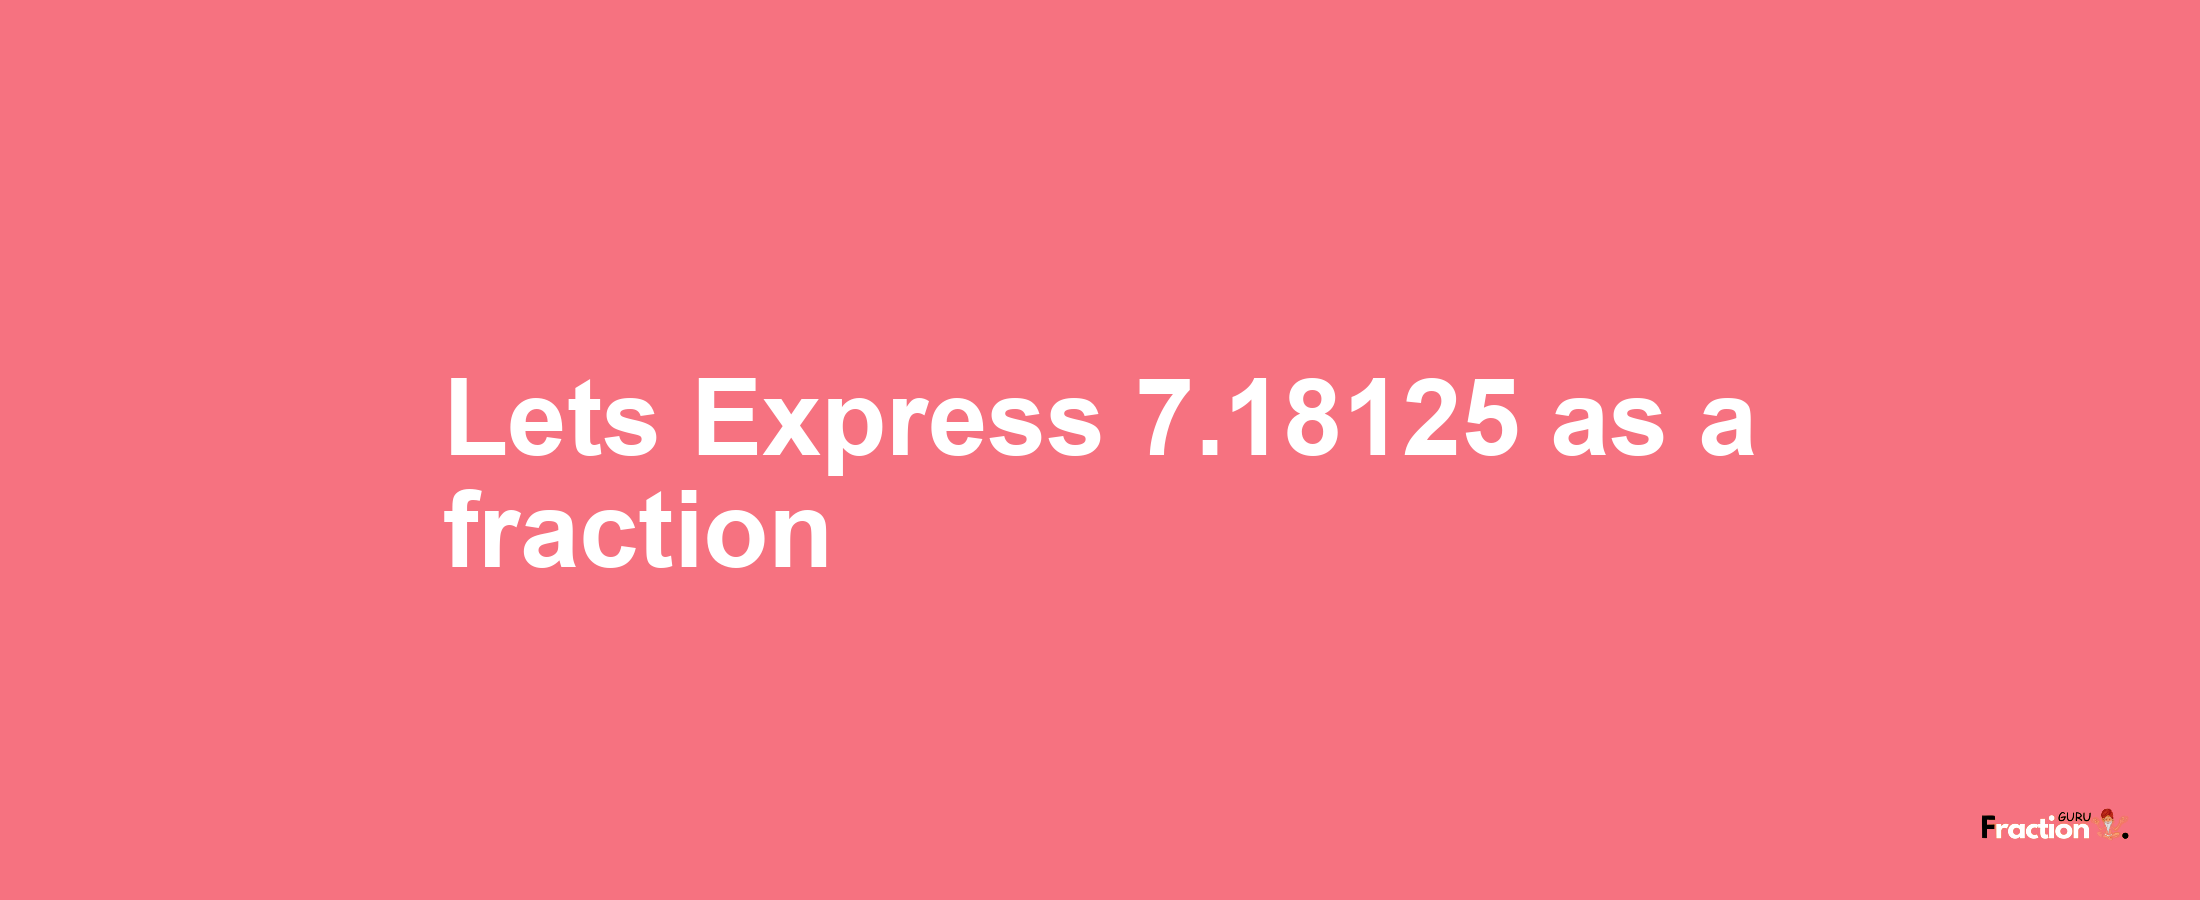 Lets Express 7.18125 as afraction